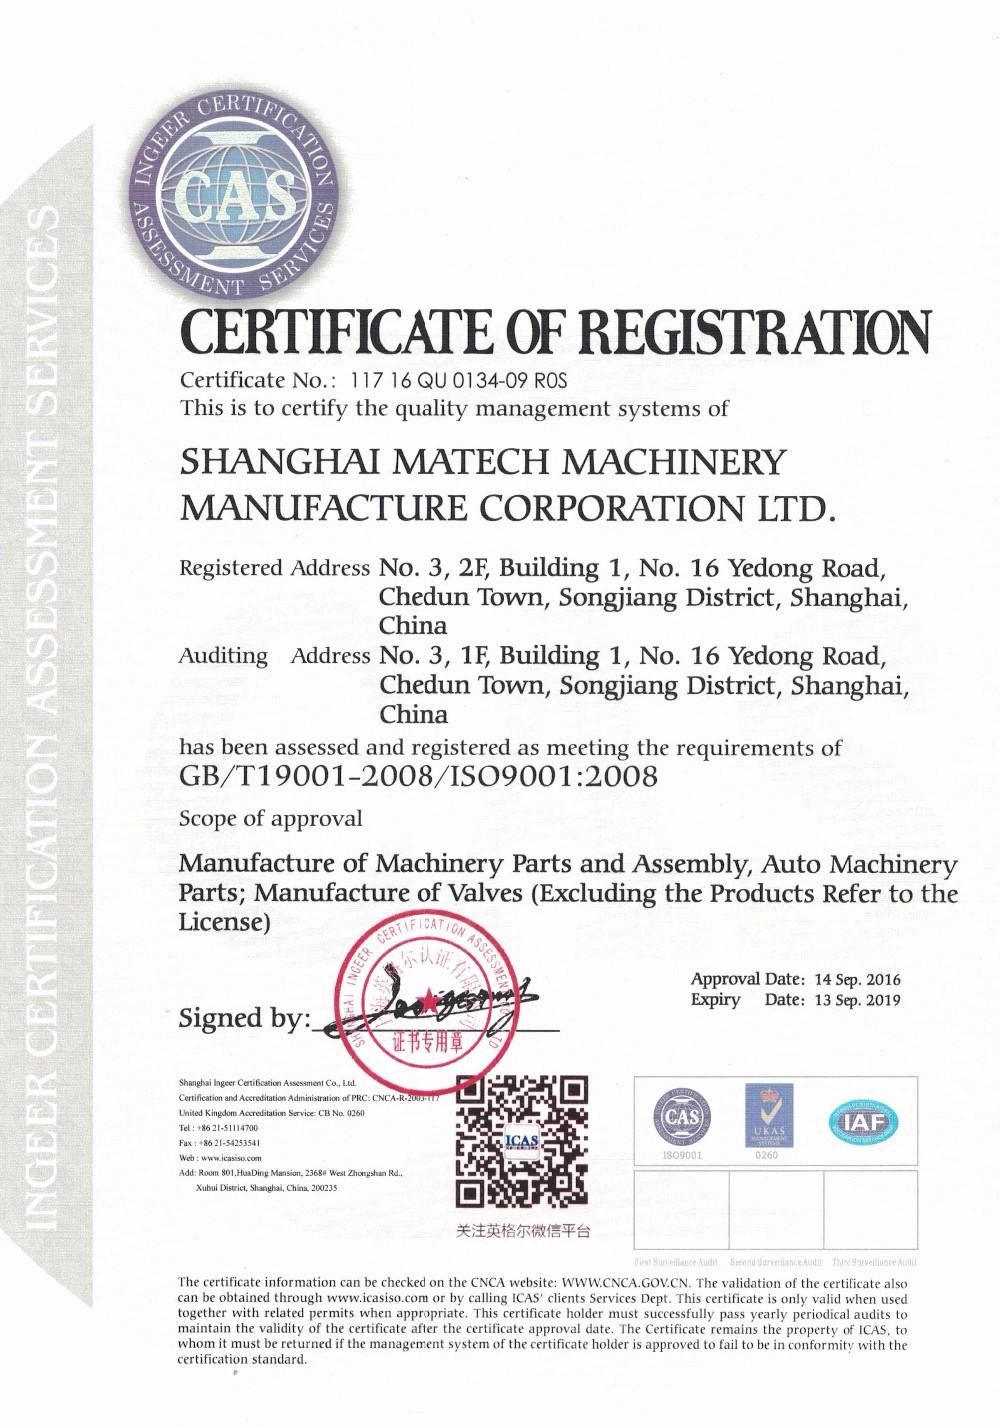 MATECH Stainless Steel Machinery Lost Wax Casting Valve Part(图8)